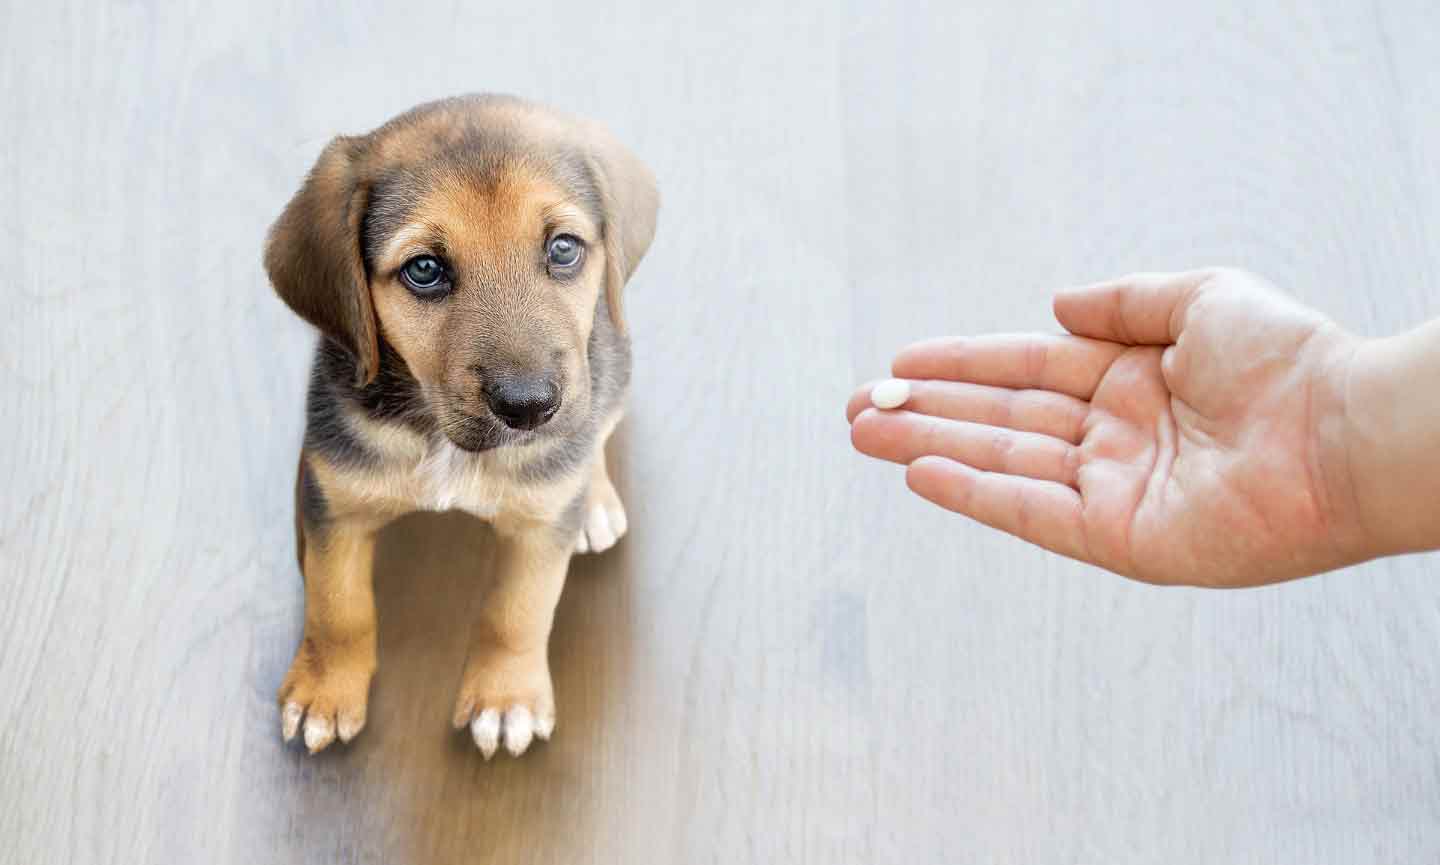 A hand feeding a supplement to a puppy